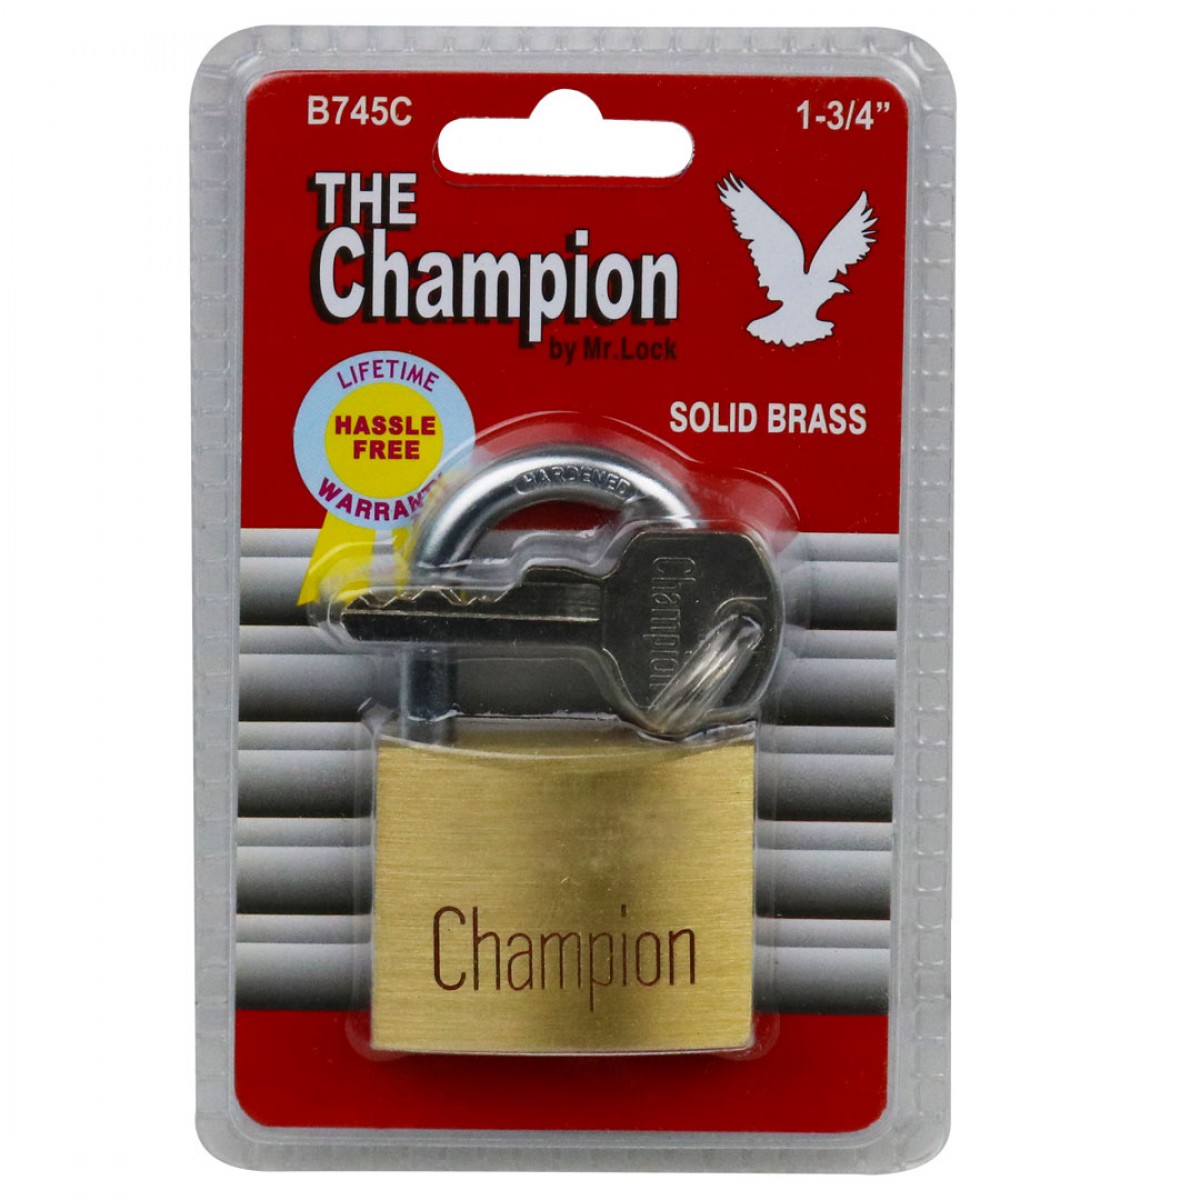 Reviews for Champion Brass Lock - 45mm; 6/Box (RETAIL PKGD)